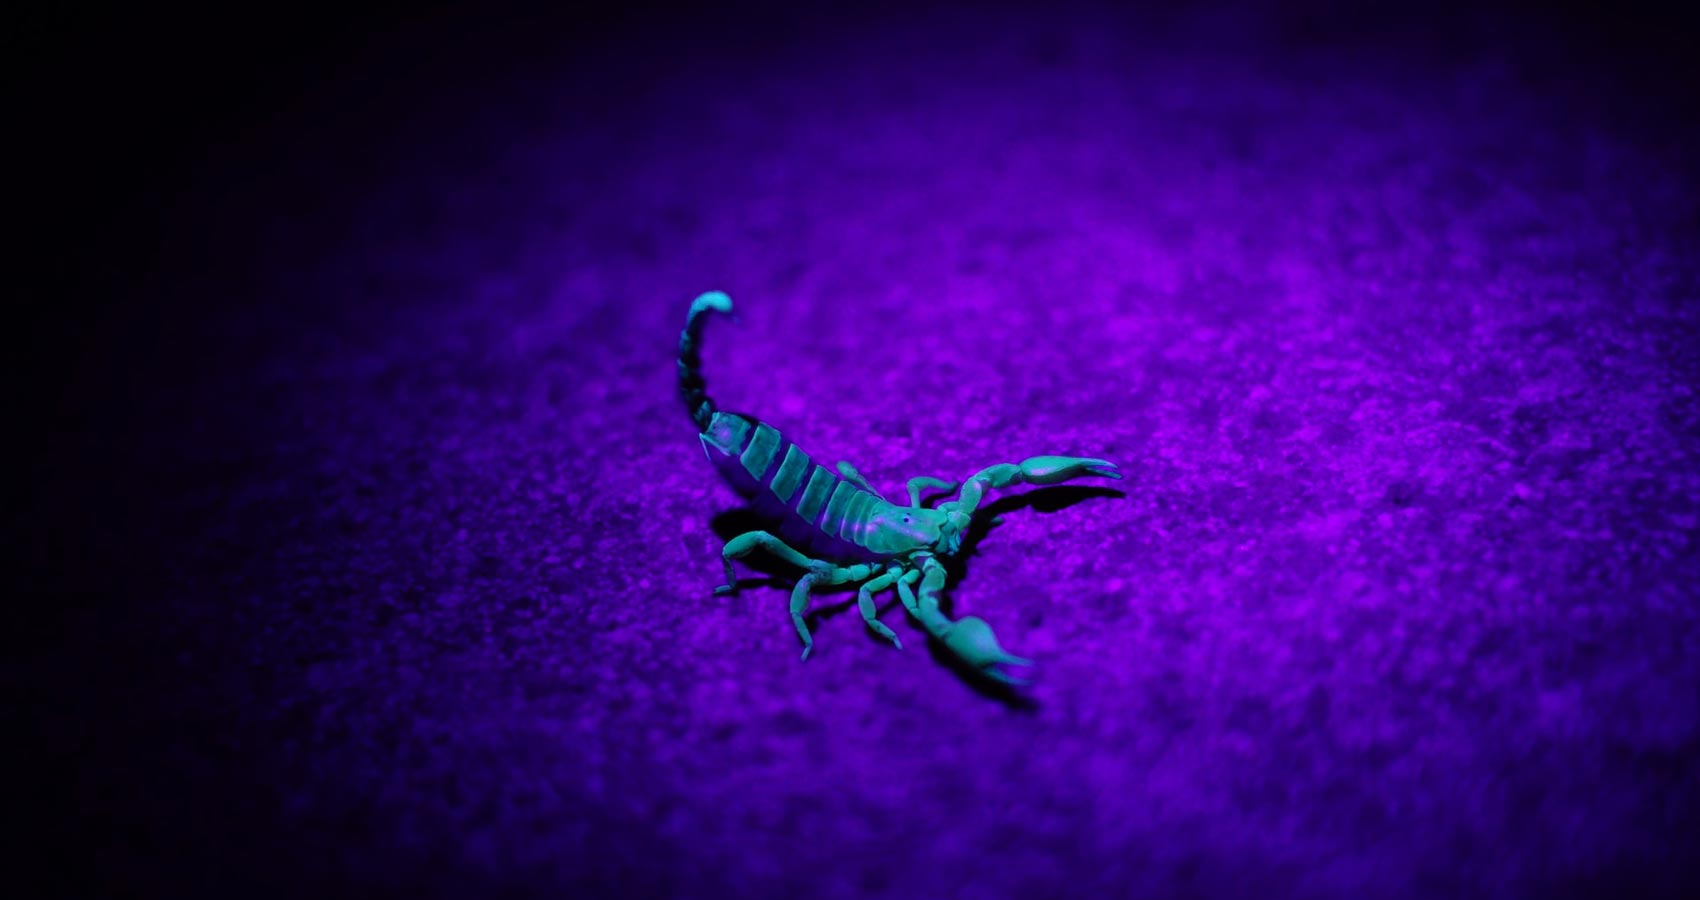 Night of The Scorpion, a poem by Nissim Ezekiel at Spillwords.com